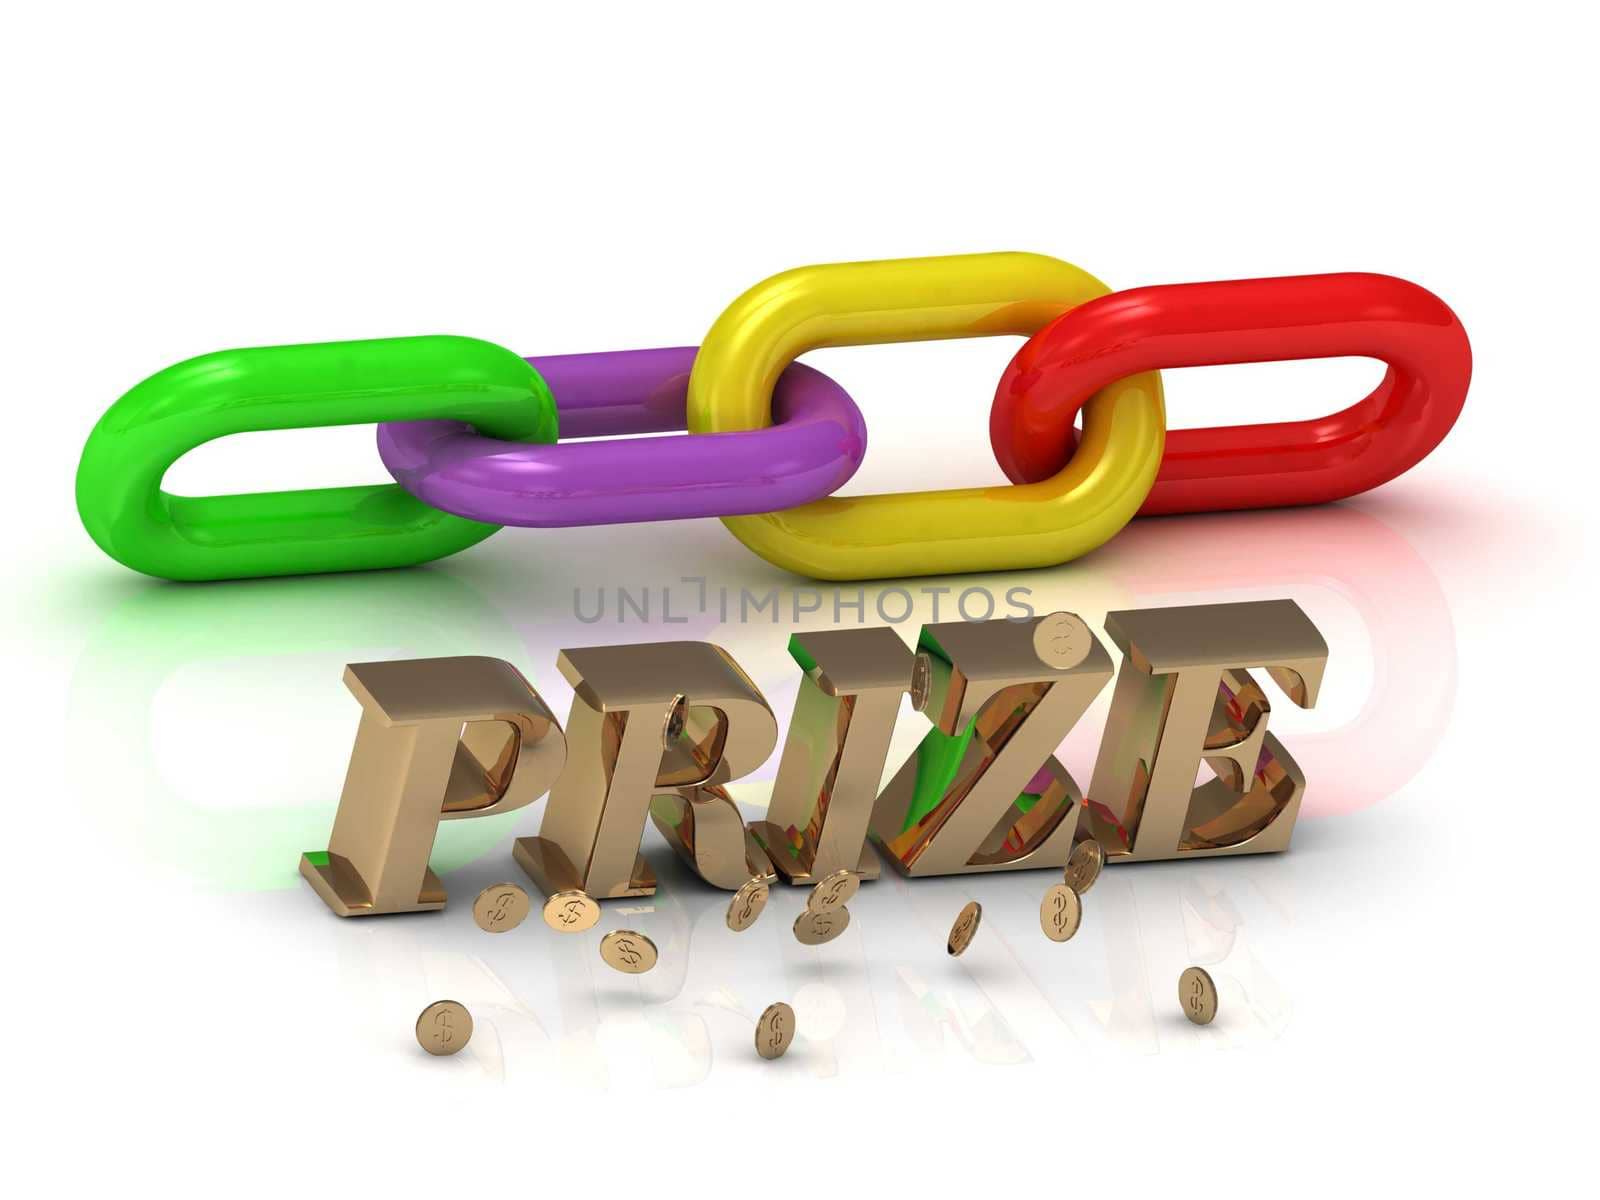 PRIZE- inscription of bright letters and color chain on white background